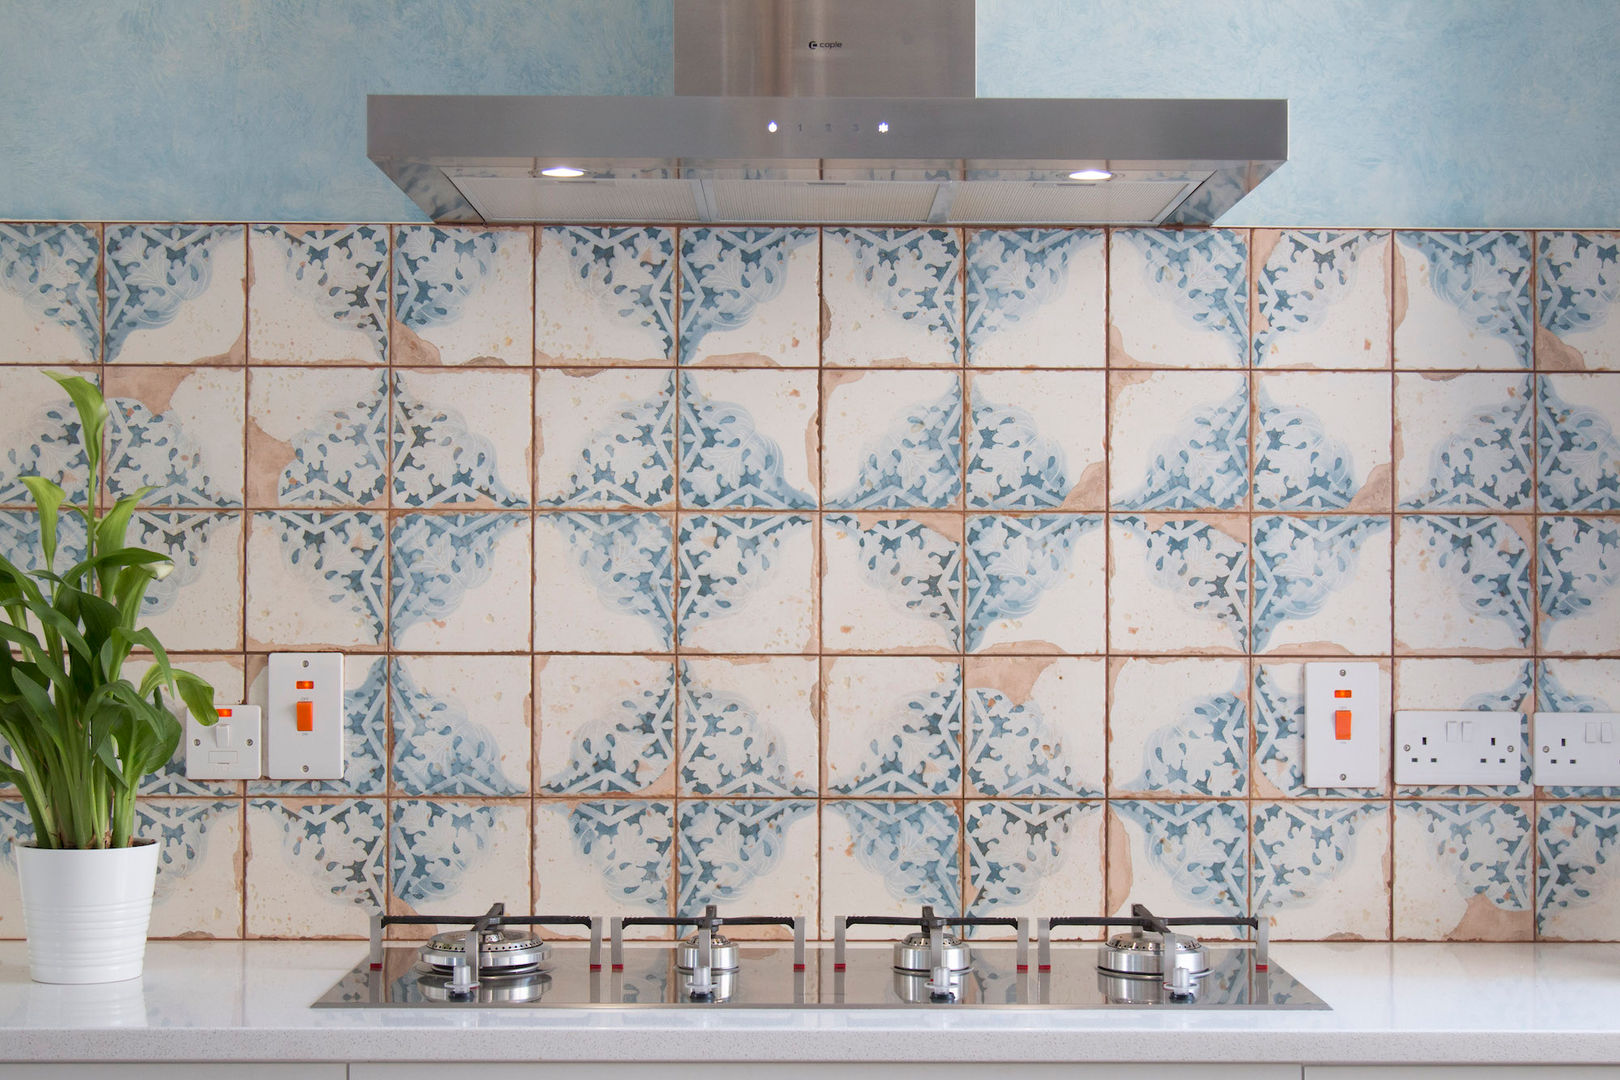 We love tiles! homify Bếp xây sẵn Gỗ Wood effect cooker hood,patterned tiles,eccentric kitchen,modern kitchen,gas hob